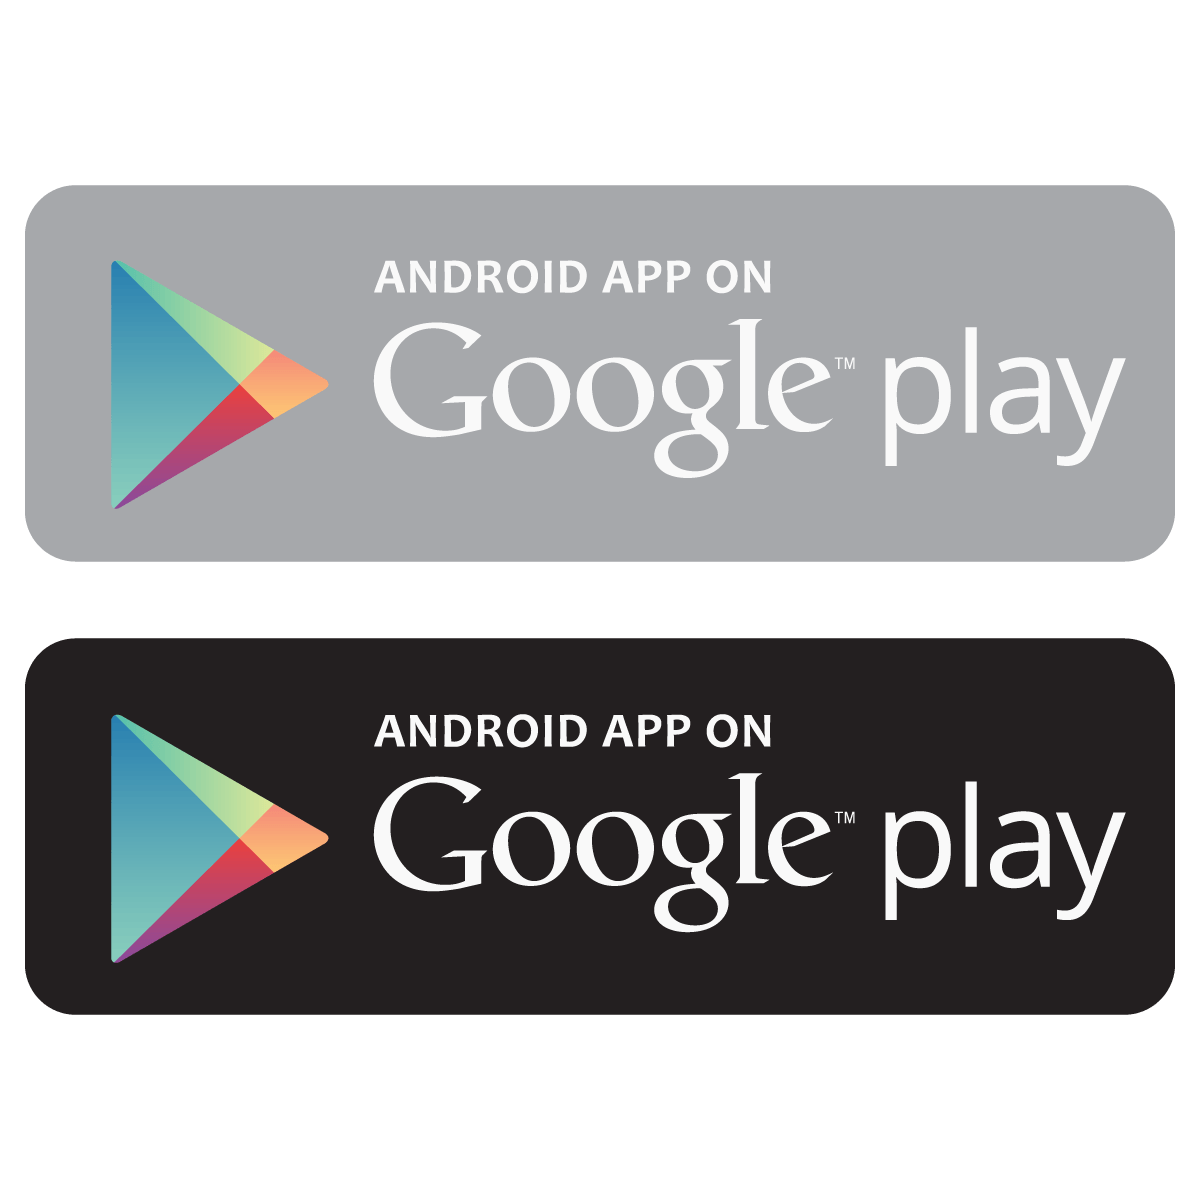 Andriod App On Google Play Logo - Android App On Google Play Logo Vector | Free Vector Silhouette ...